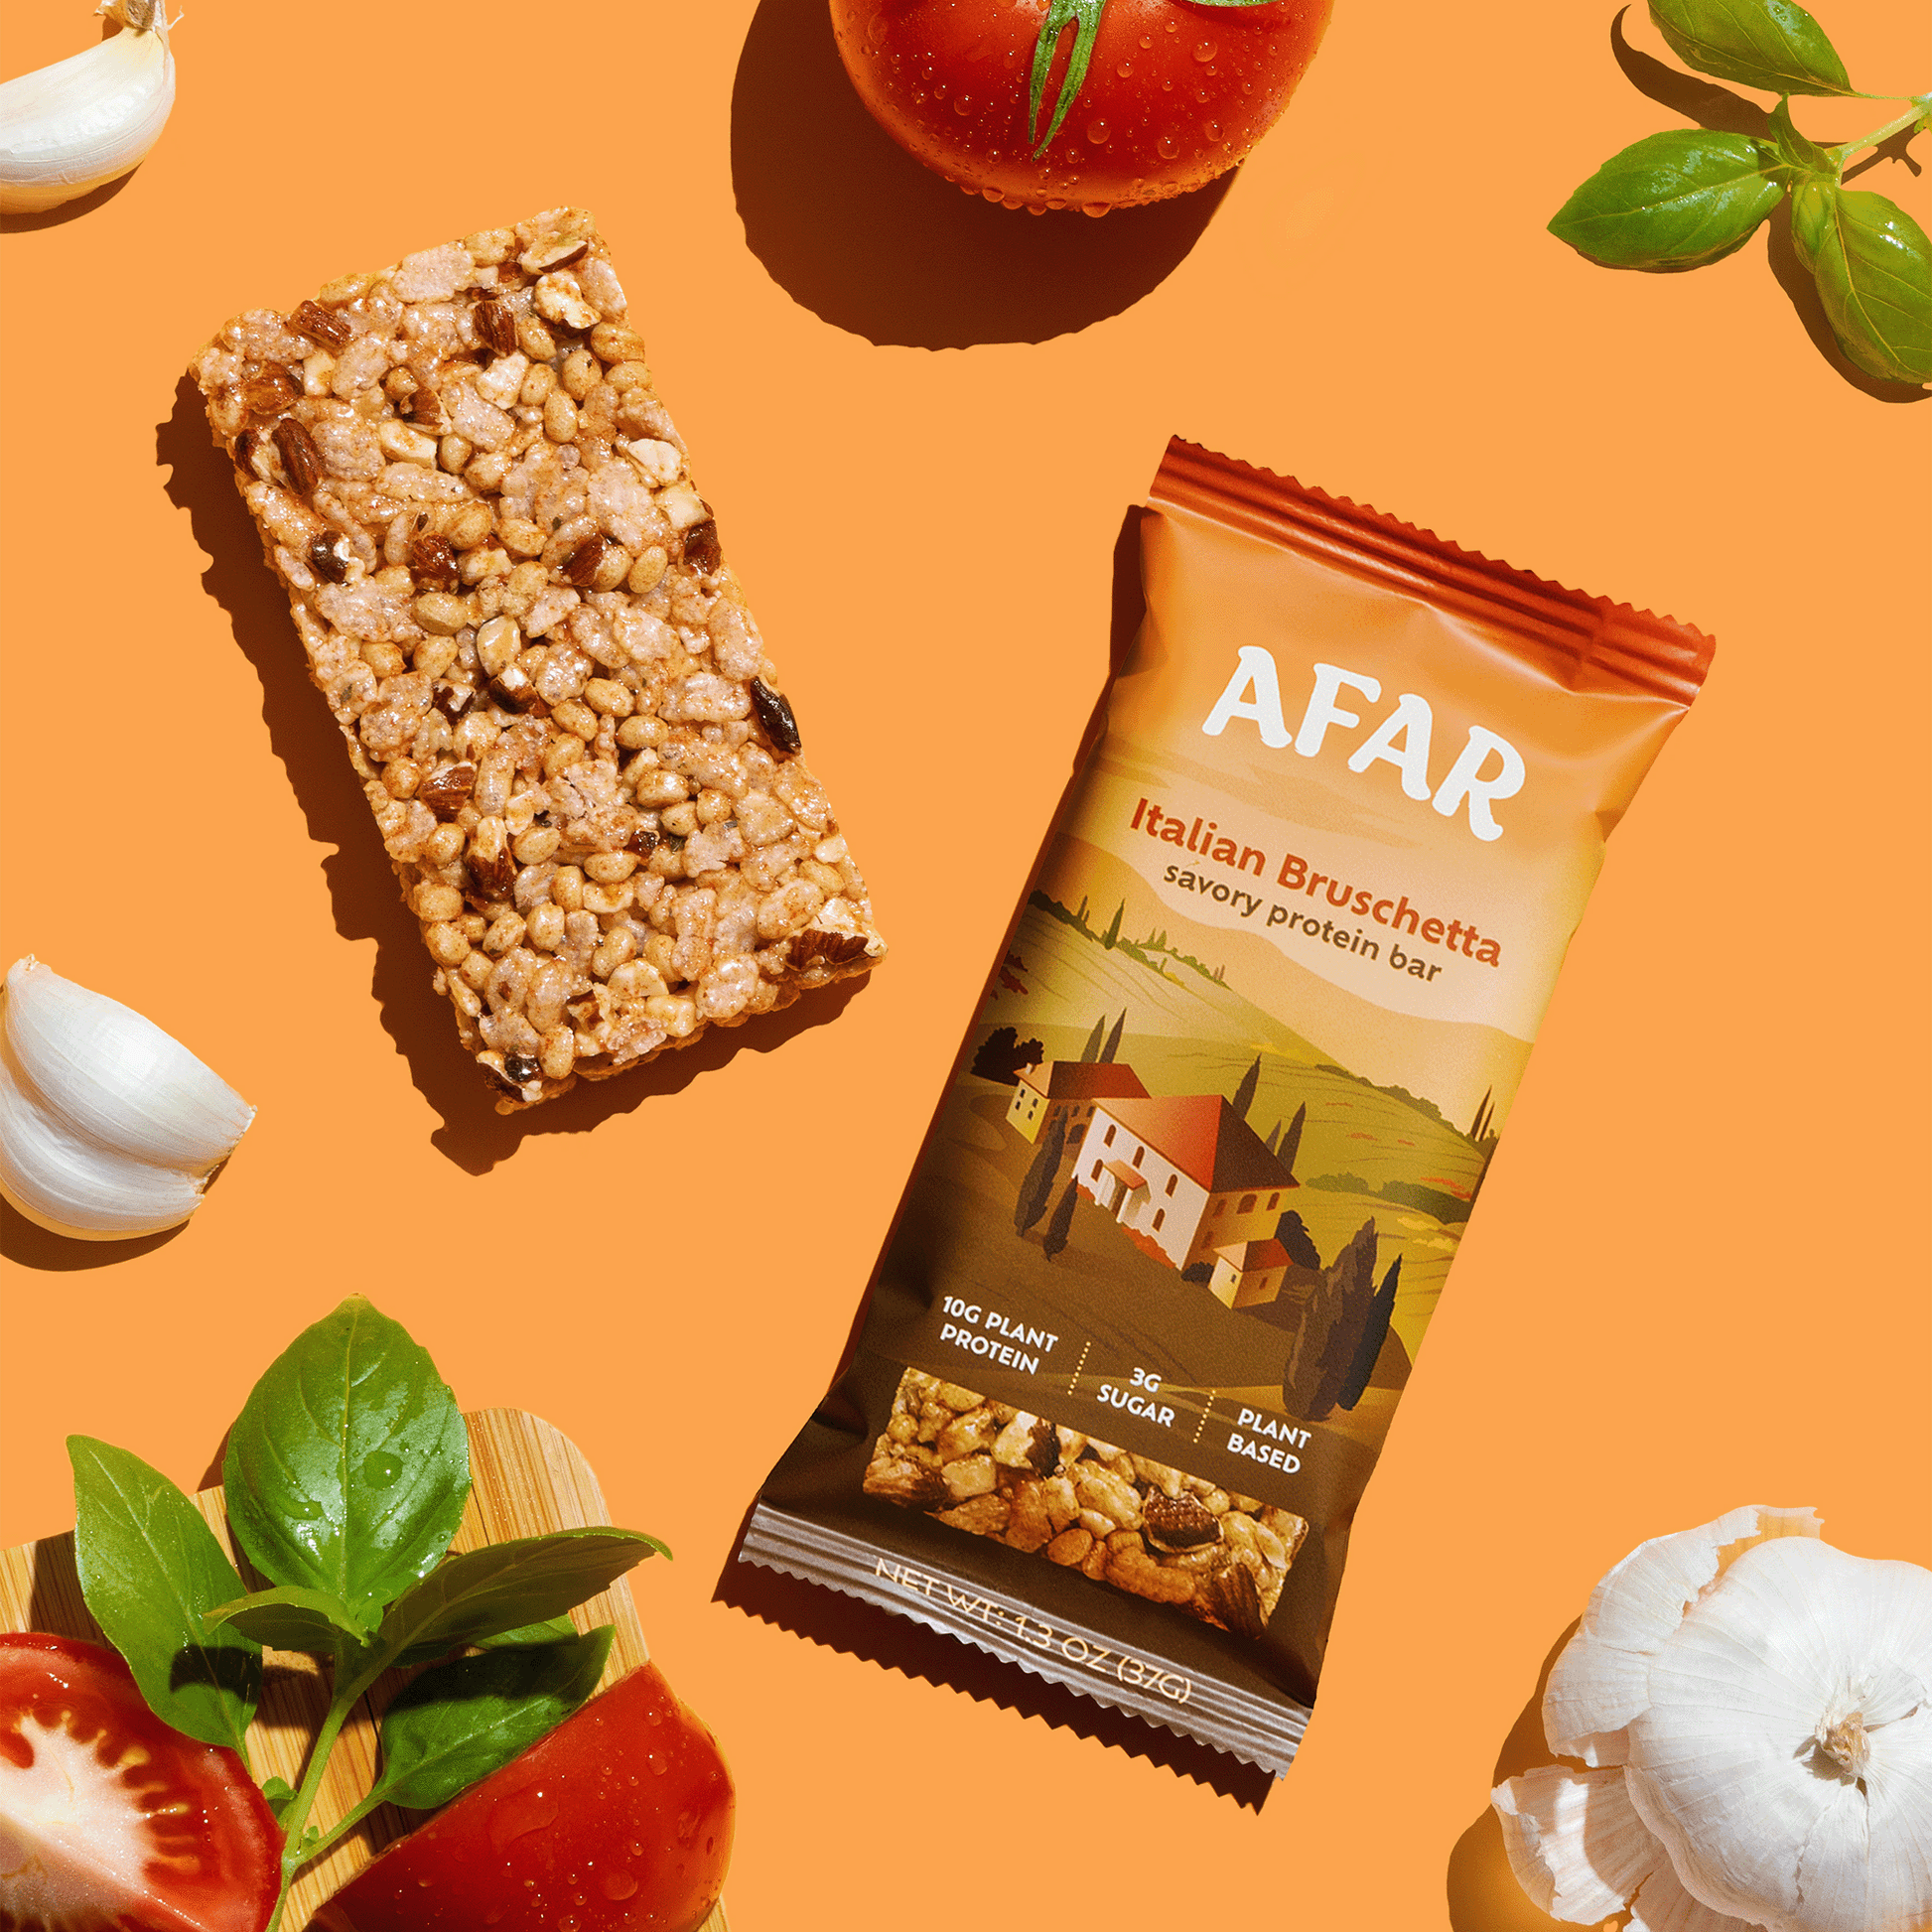 Afar's Italian Bruschetta protein bar is savory, crispy, and low sugar. Each bar is vegan and gluten-free, packing 10g protein and only 3g sugar. They're great to snack on whenever, wherever - in the office, on the road, after a workout, or in place of a meal. The perfect healthy snack for adults!